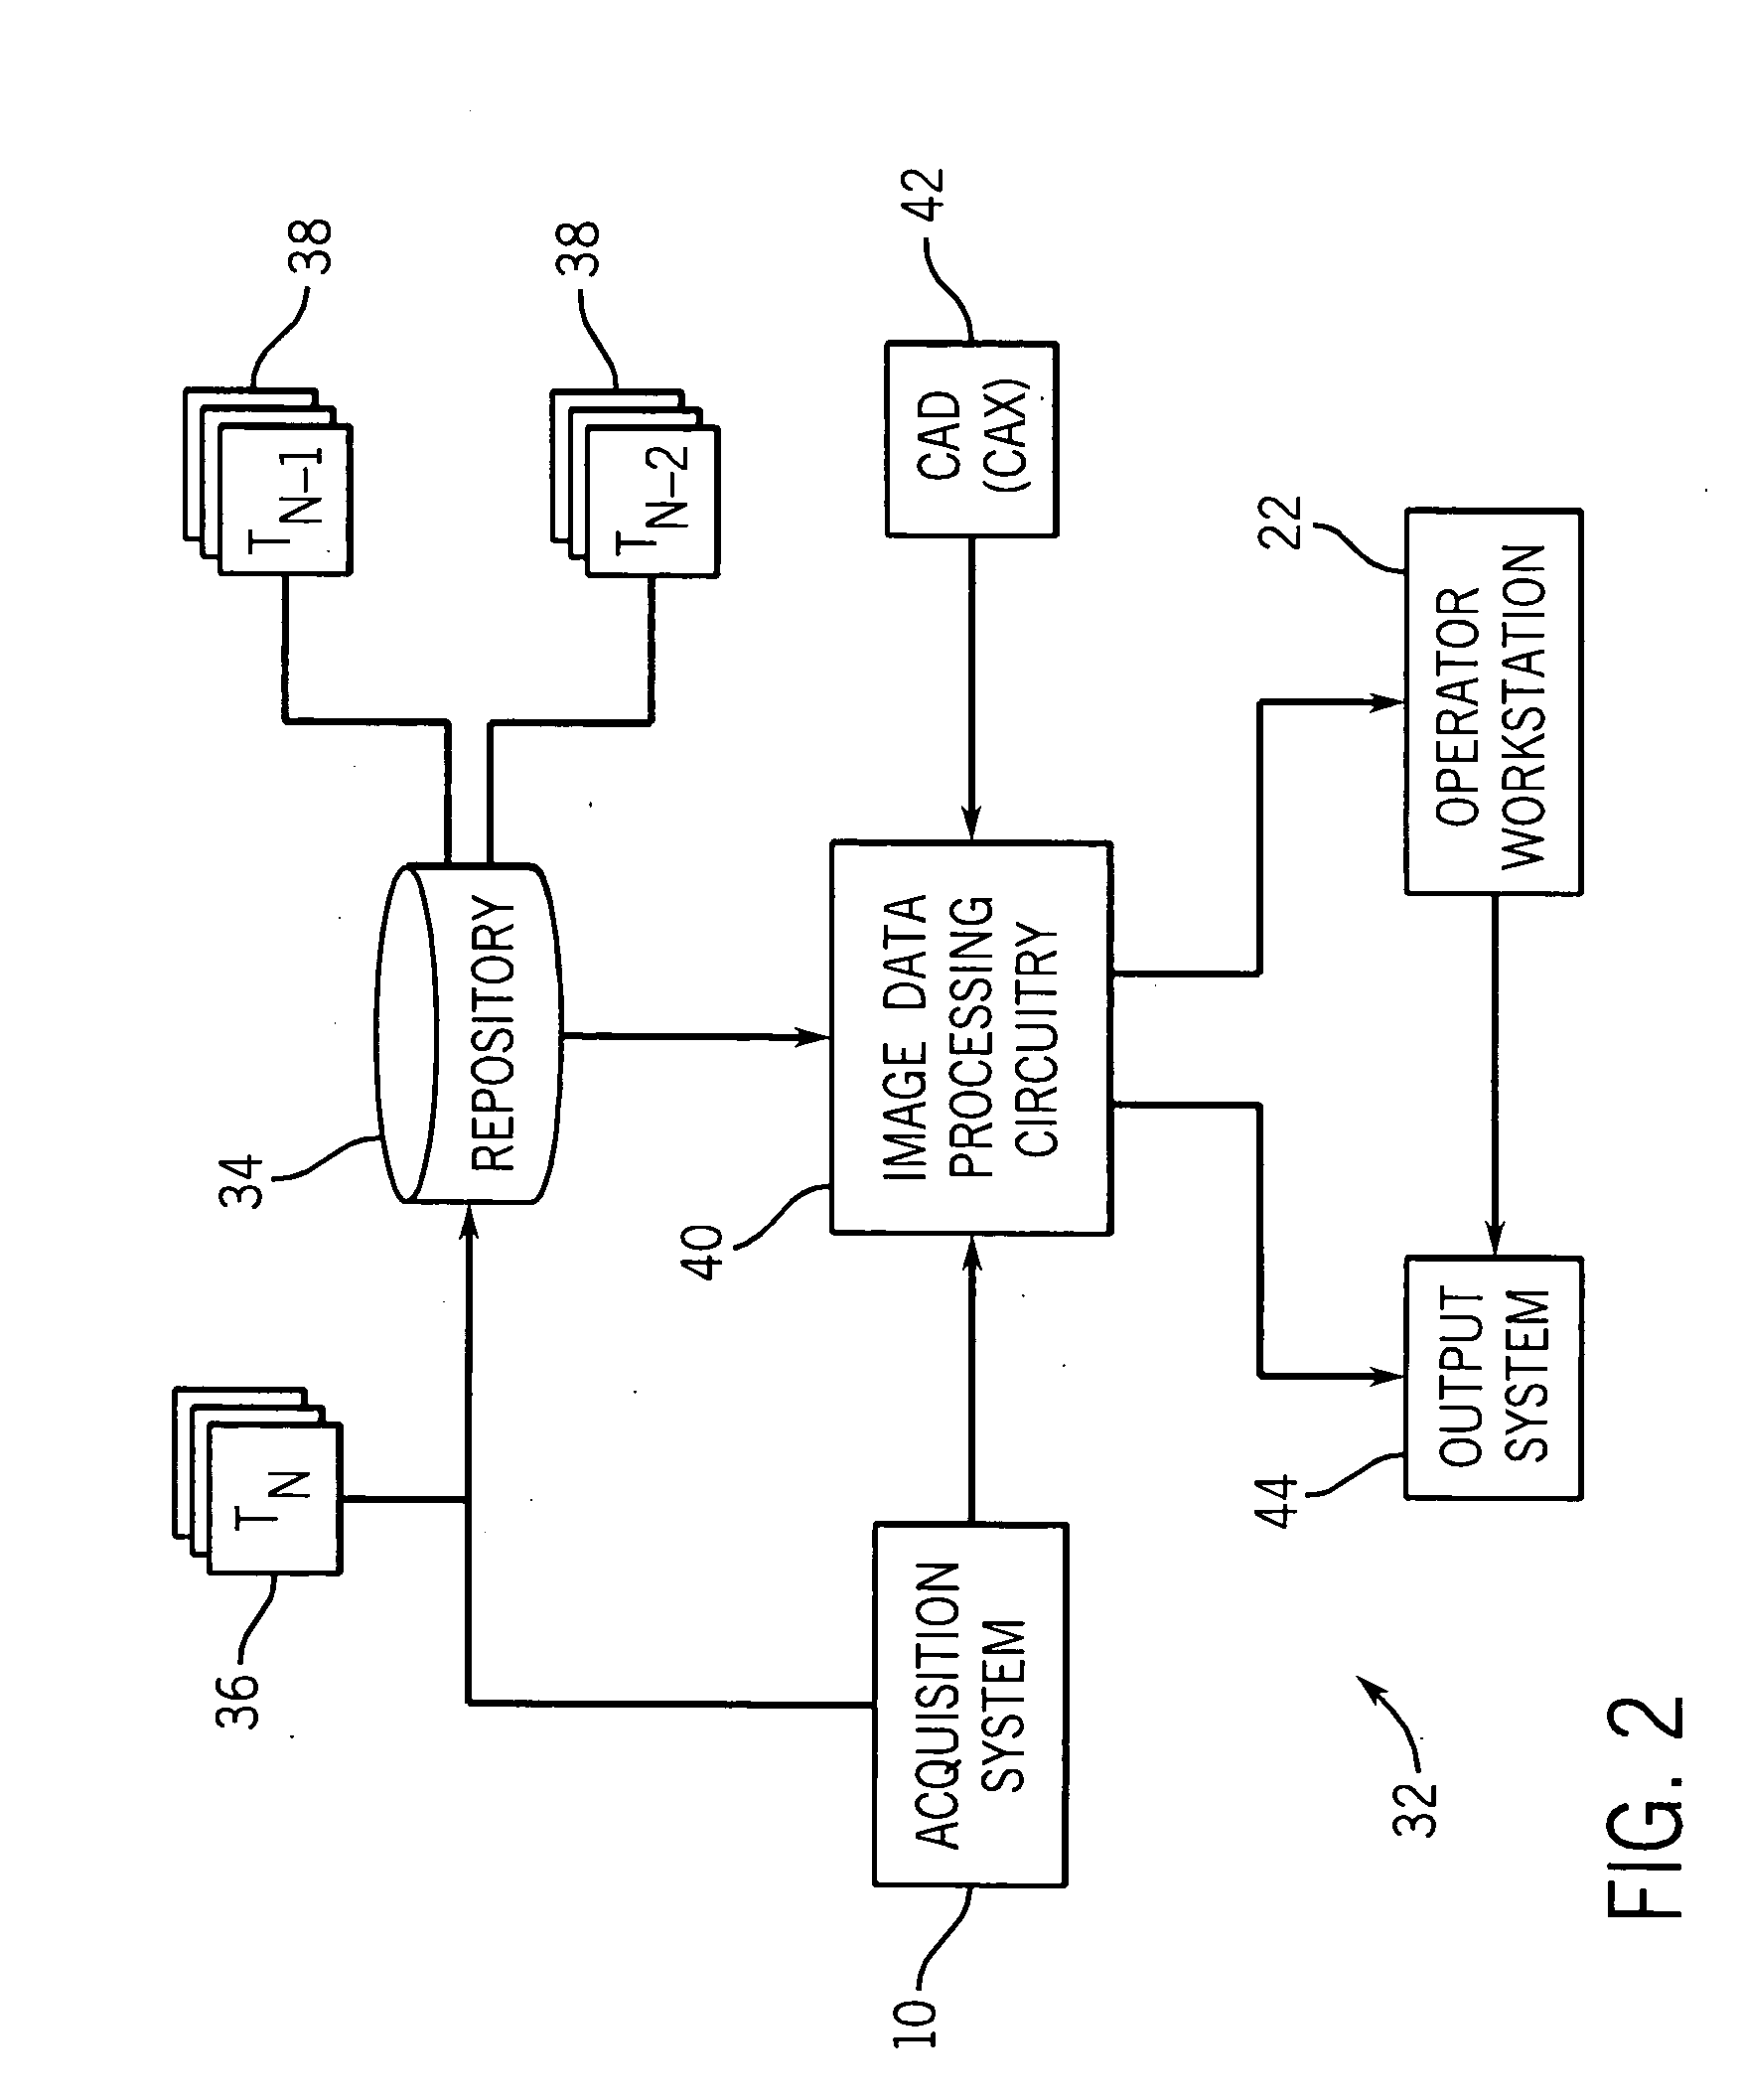 Image temporal change detection and display method and apparatus